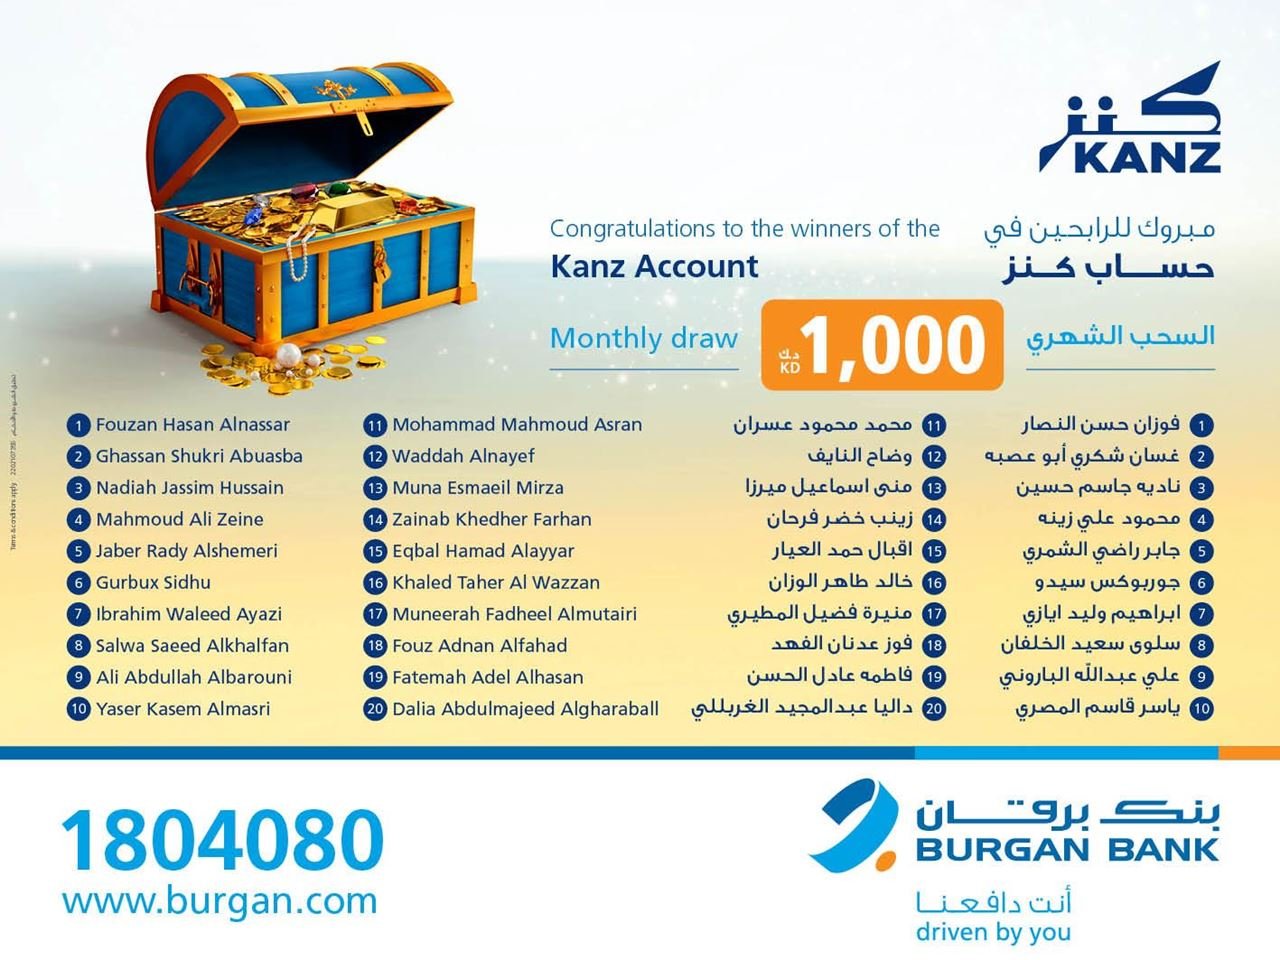 Burgan Bank Announces the Names of the First Monthly Draw Winners of Kanz Account